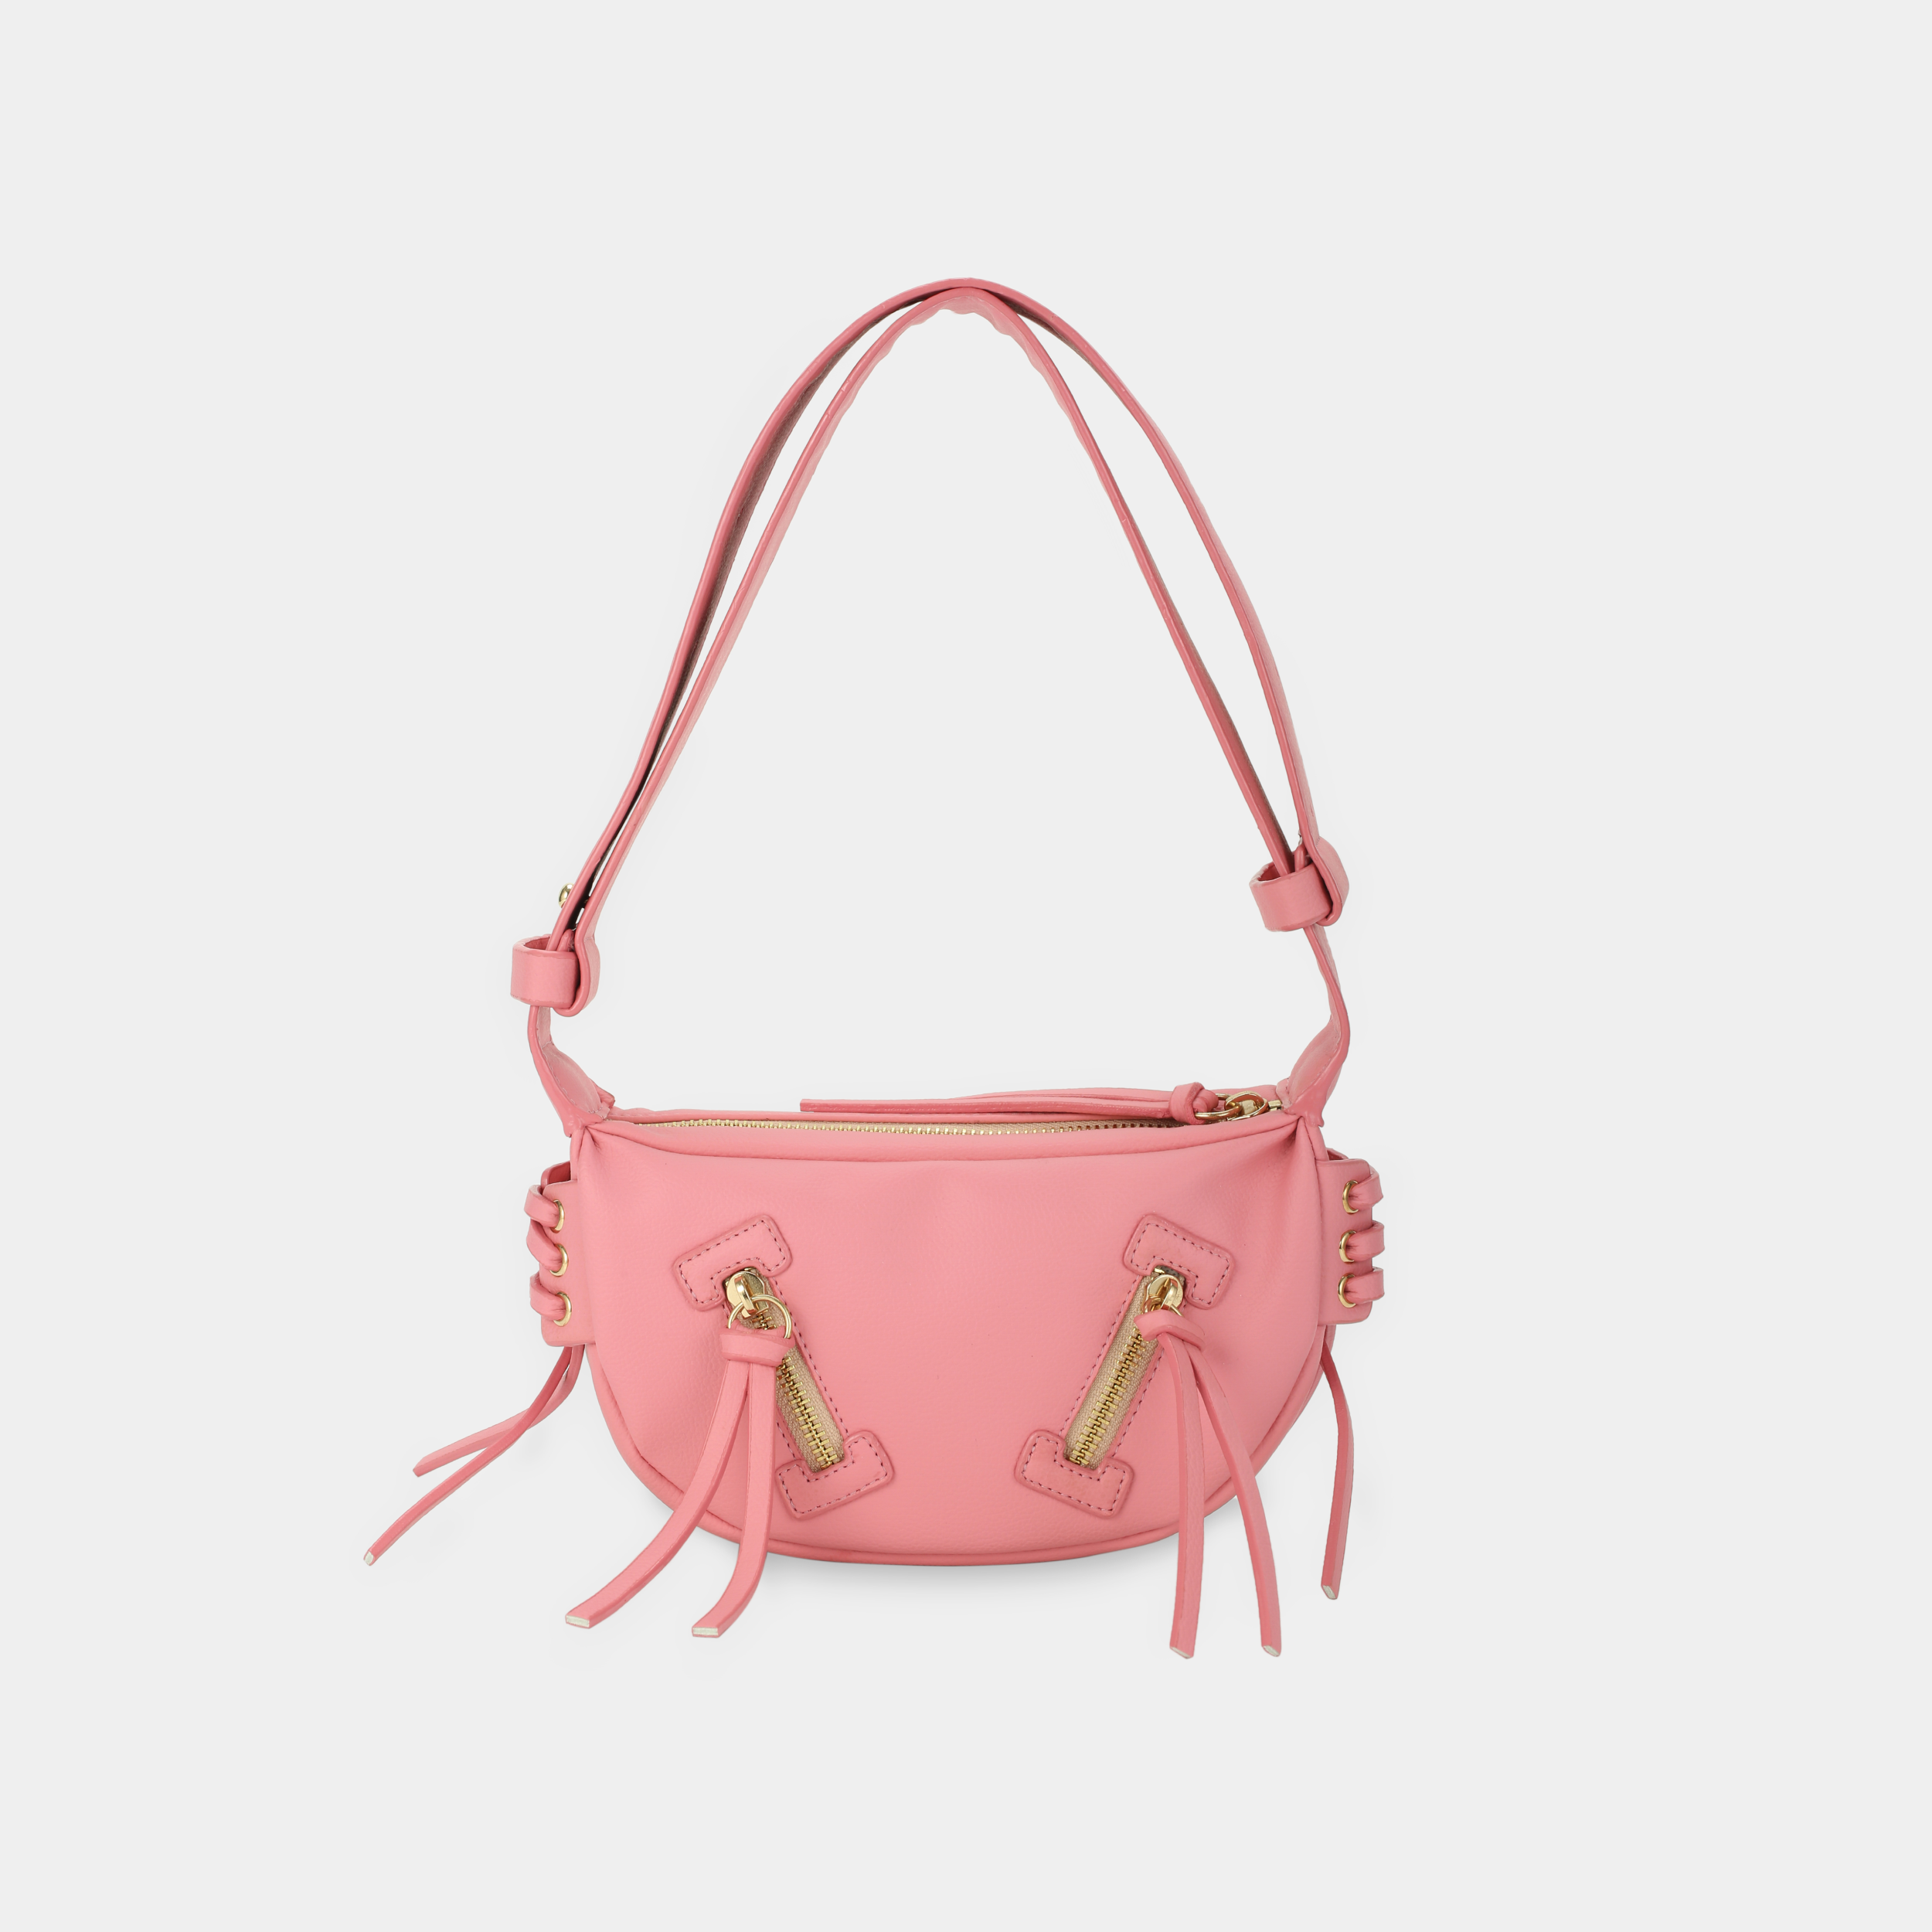 LACE bag small size (S) pastel pink